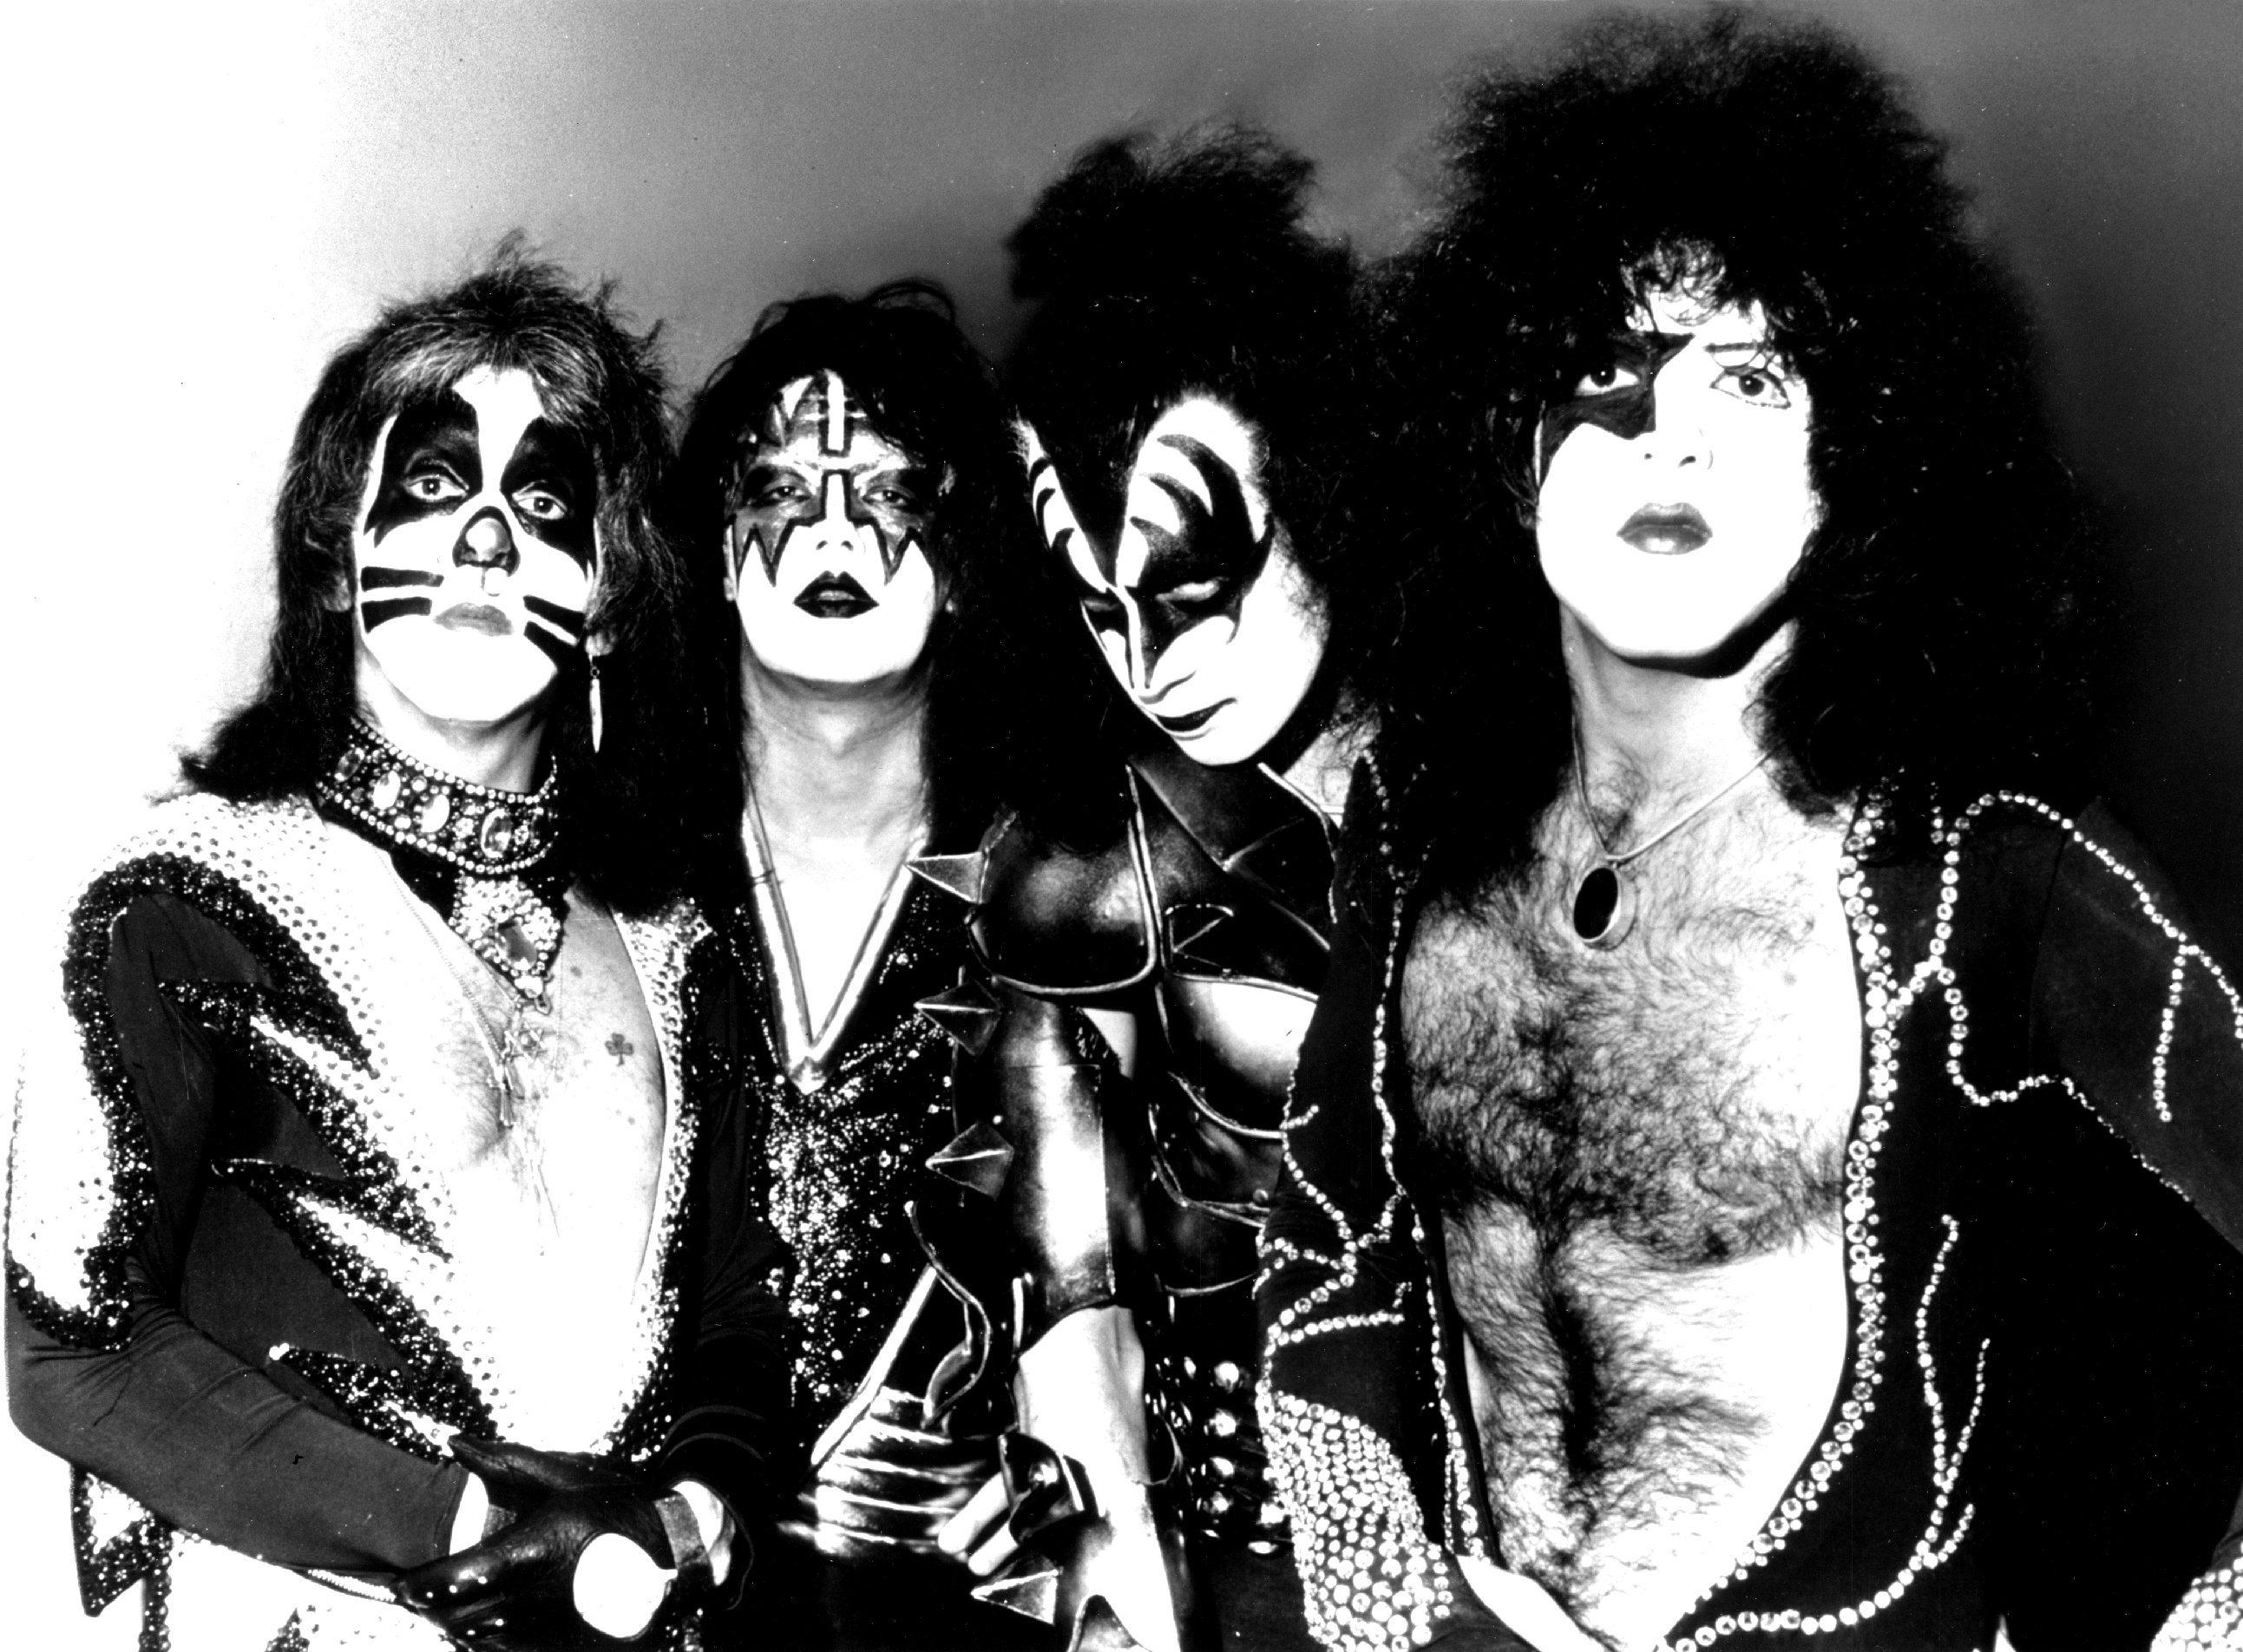 Kiss' Peter Criss, Ace Frehley, Gene Simmons, and Paul Stanley